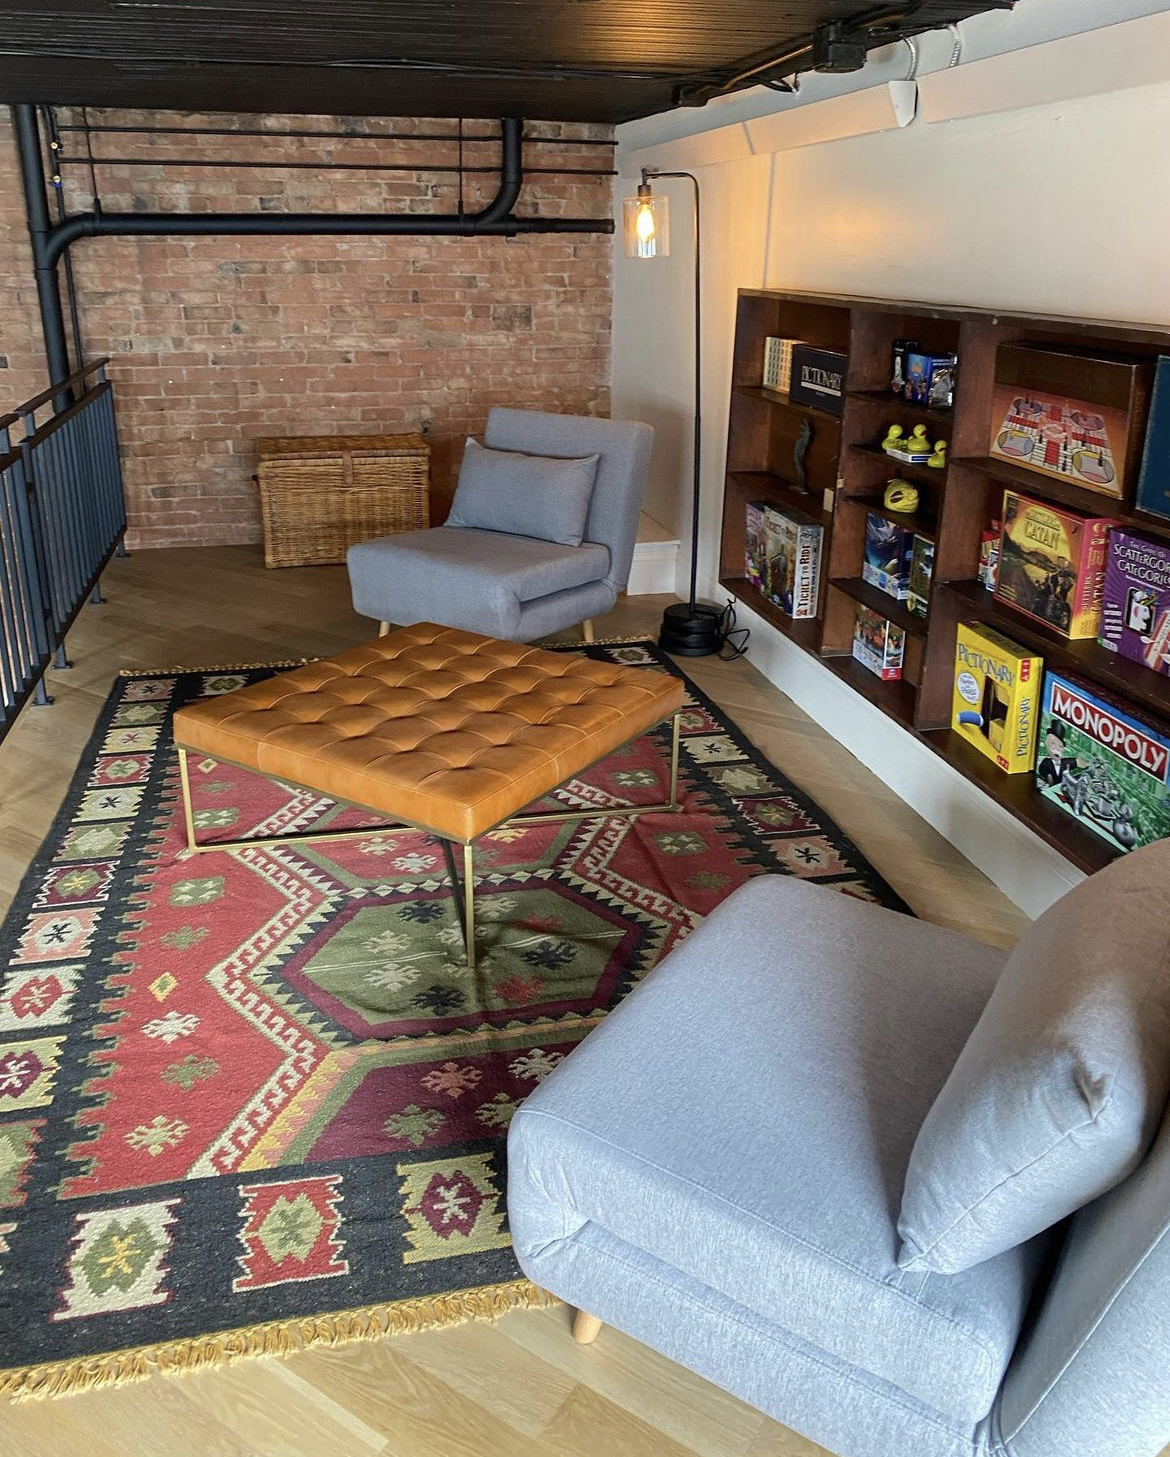 game loft inside airbnb vacation rental